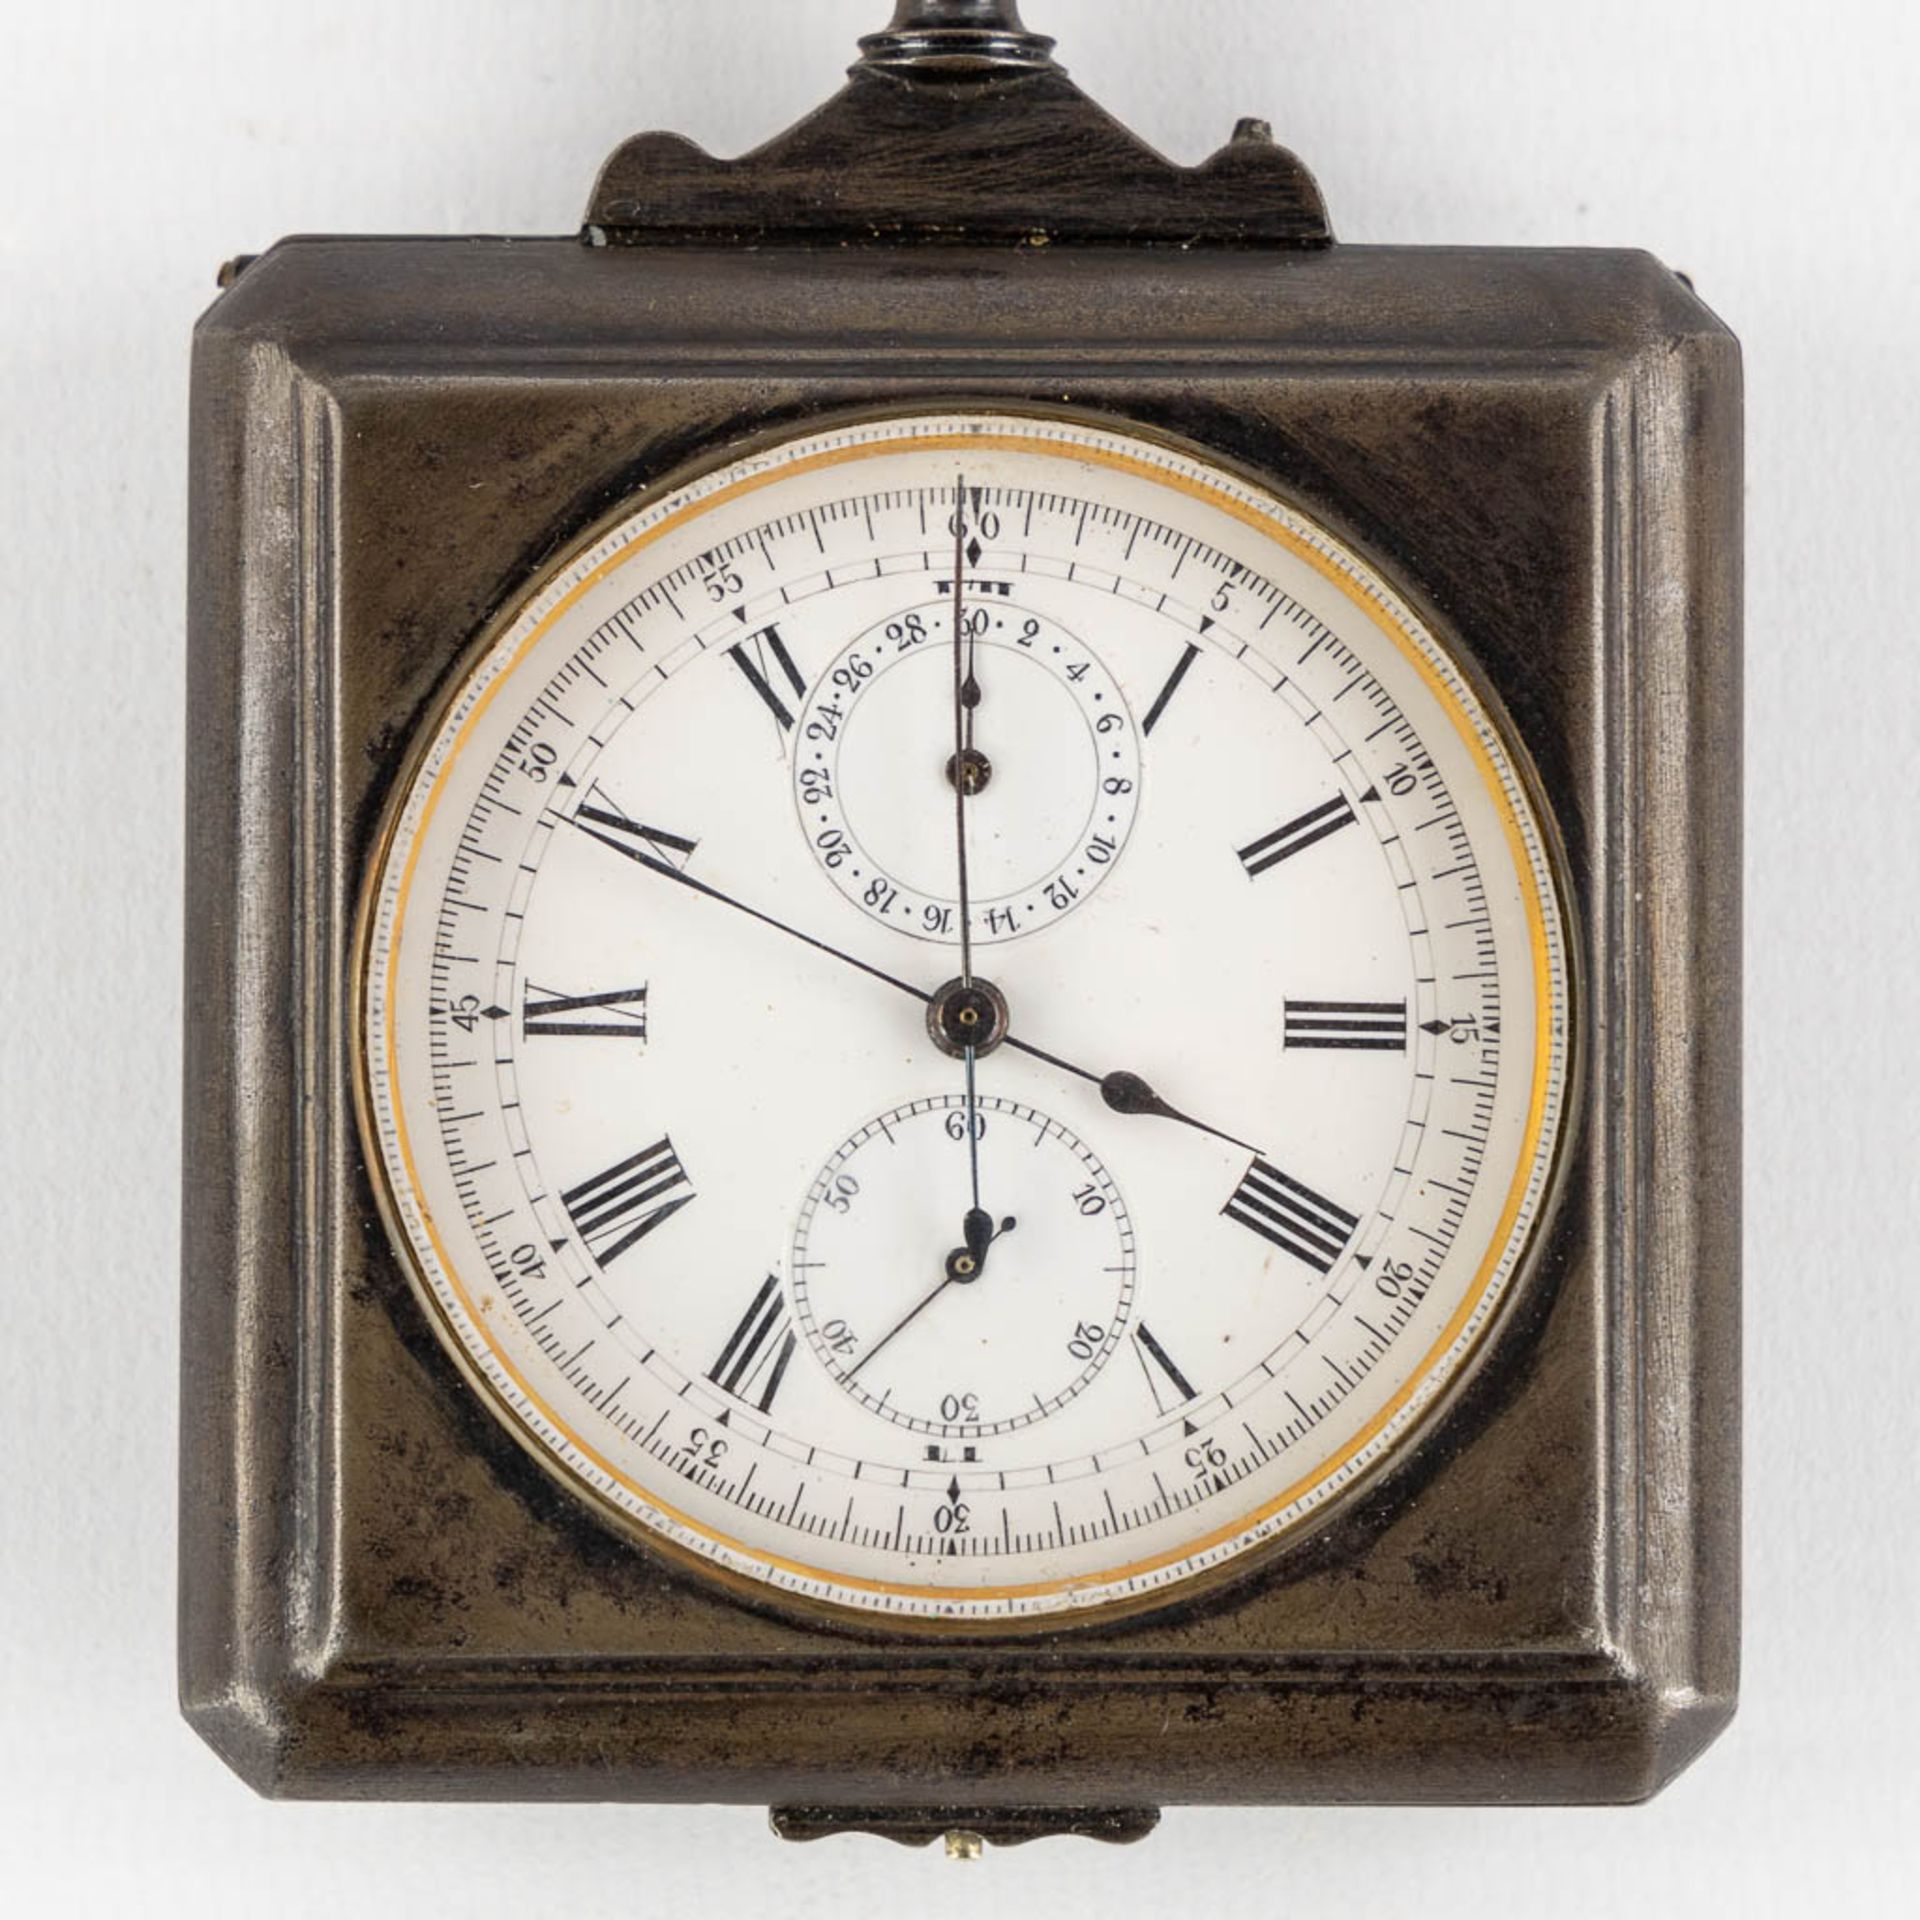 An antique 'Chronograph' pocket watch, first half of the 20th C. (W:6,4 x H:10 cm) - Image 3 of 11